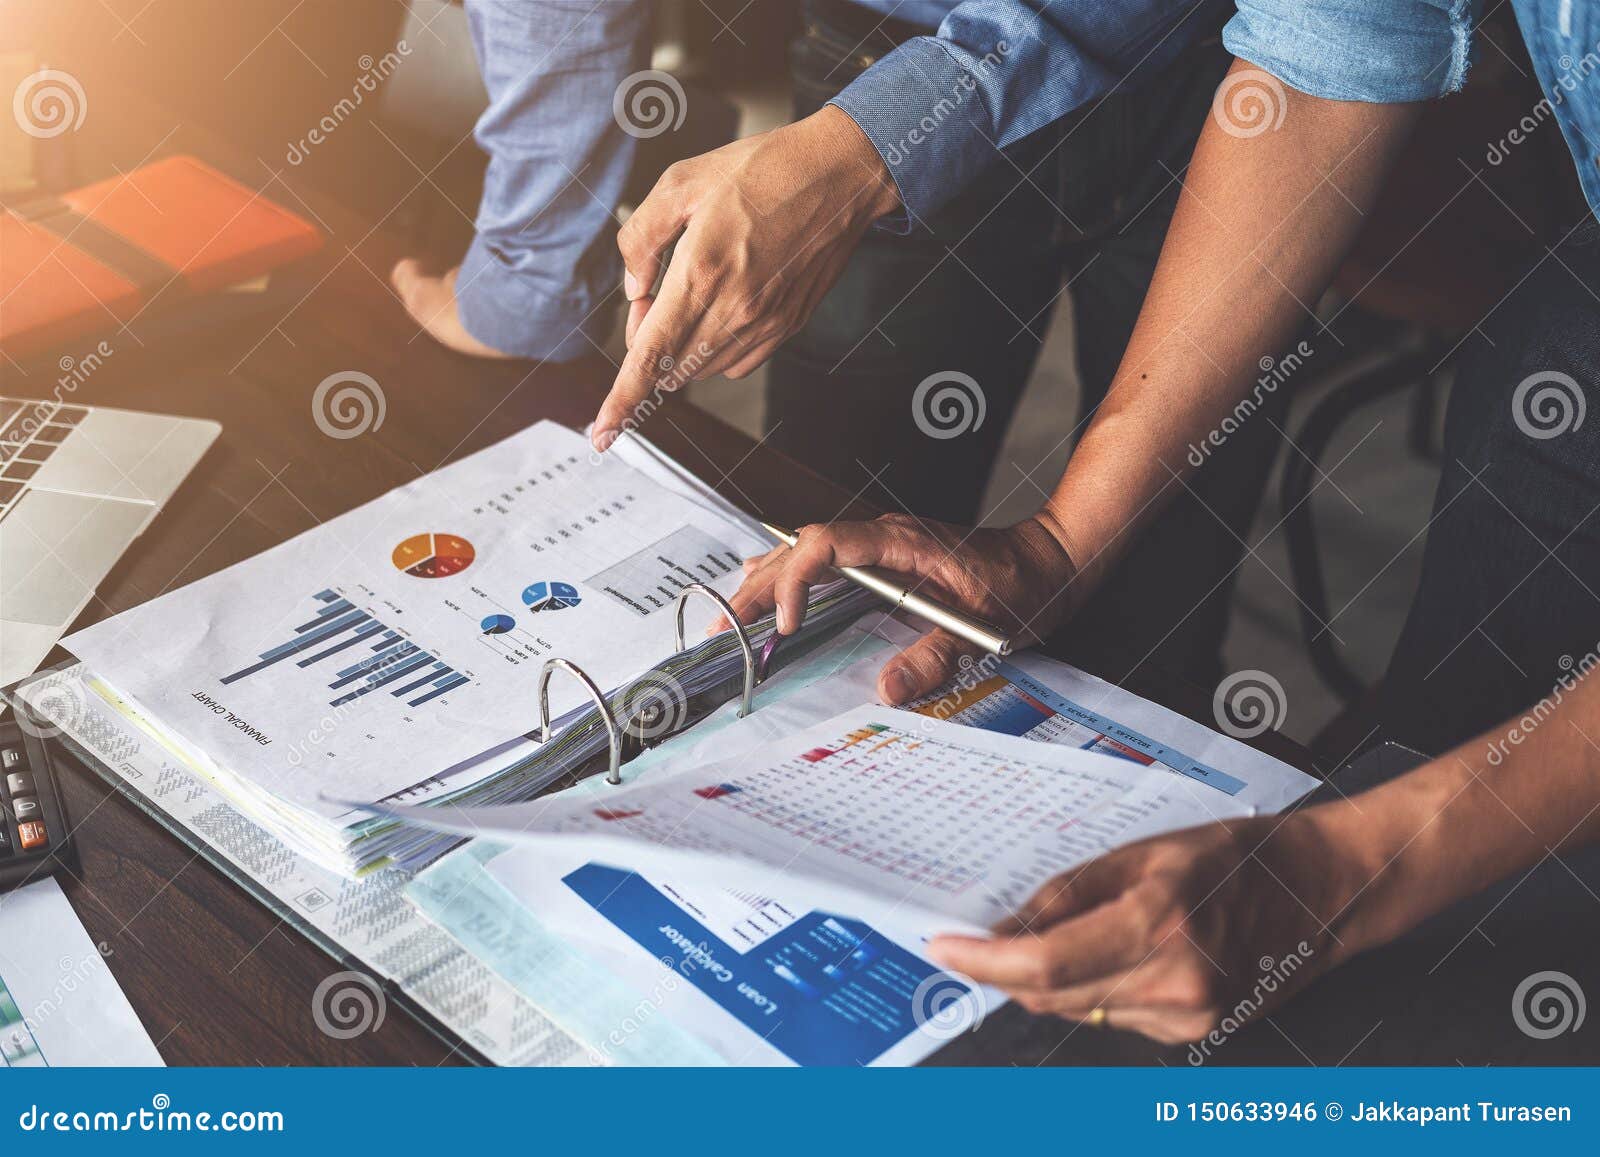 two businessman planning strategy on desk with paperwork, strategist team analyze data or information